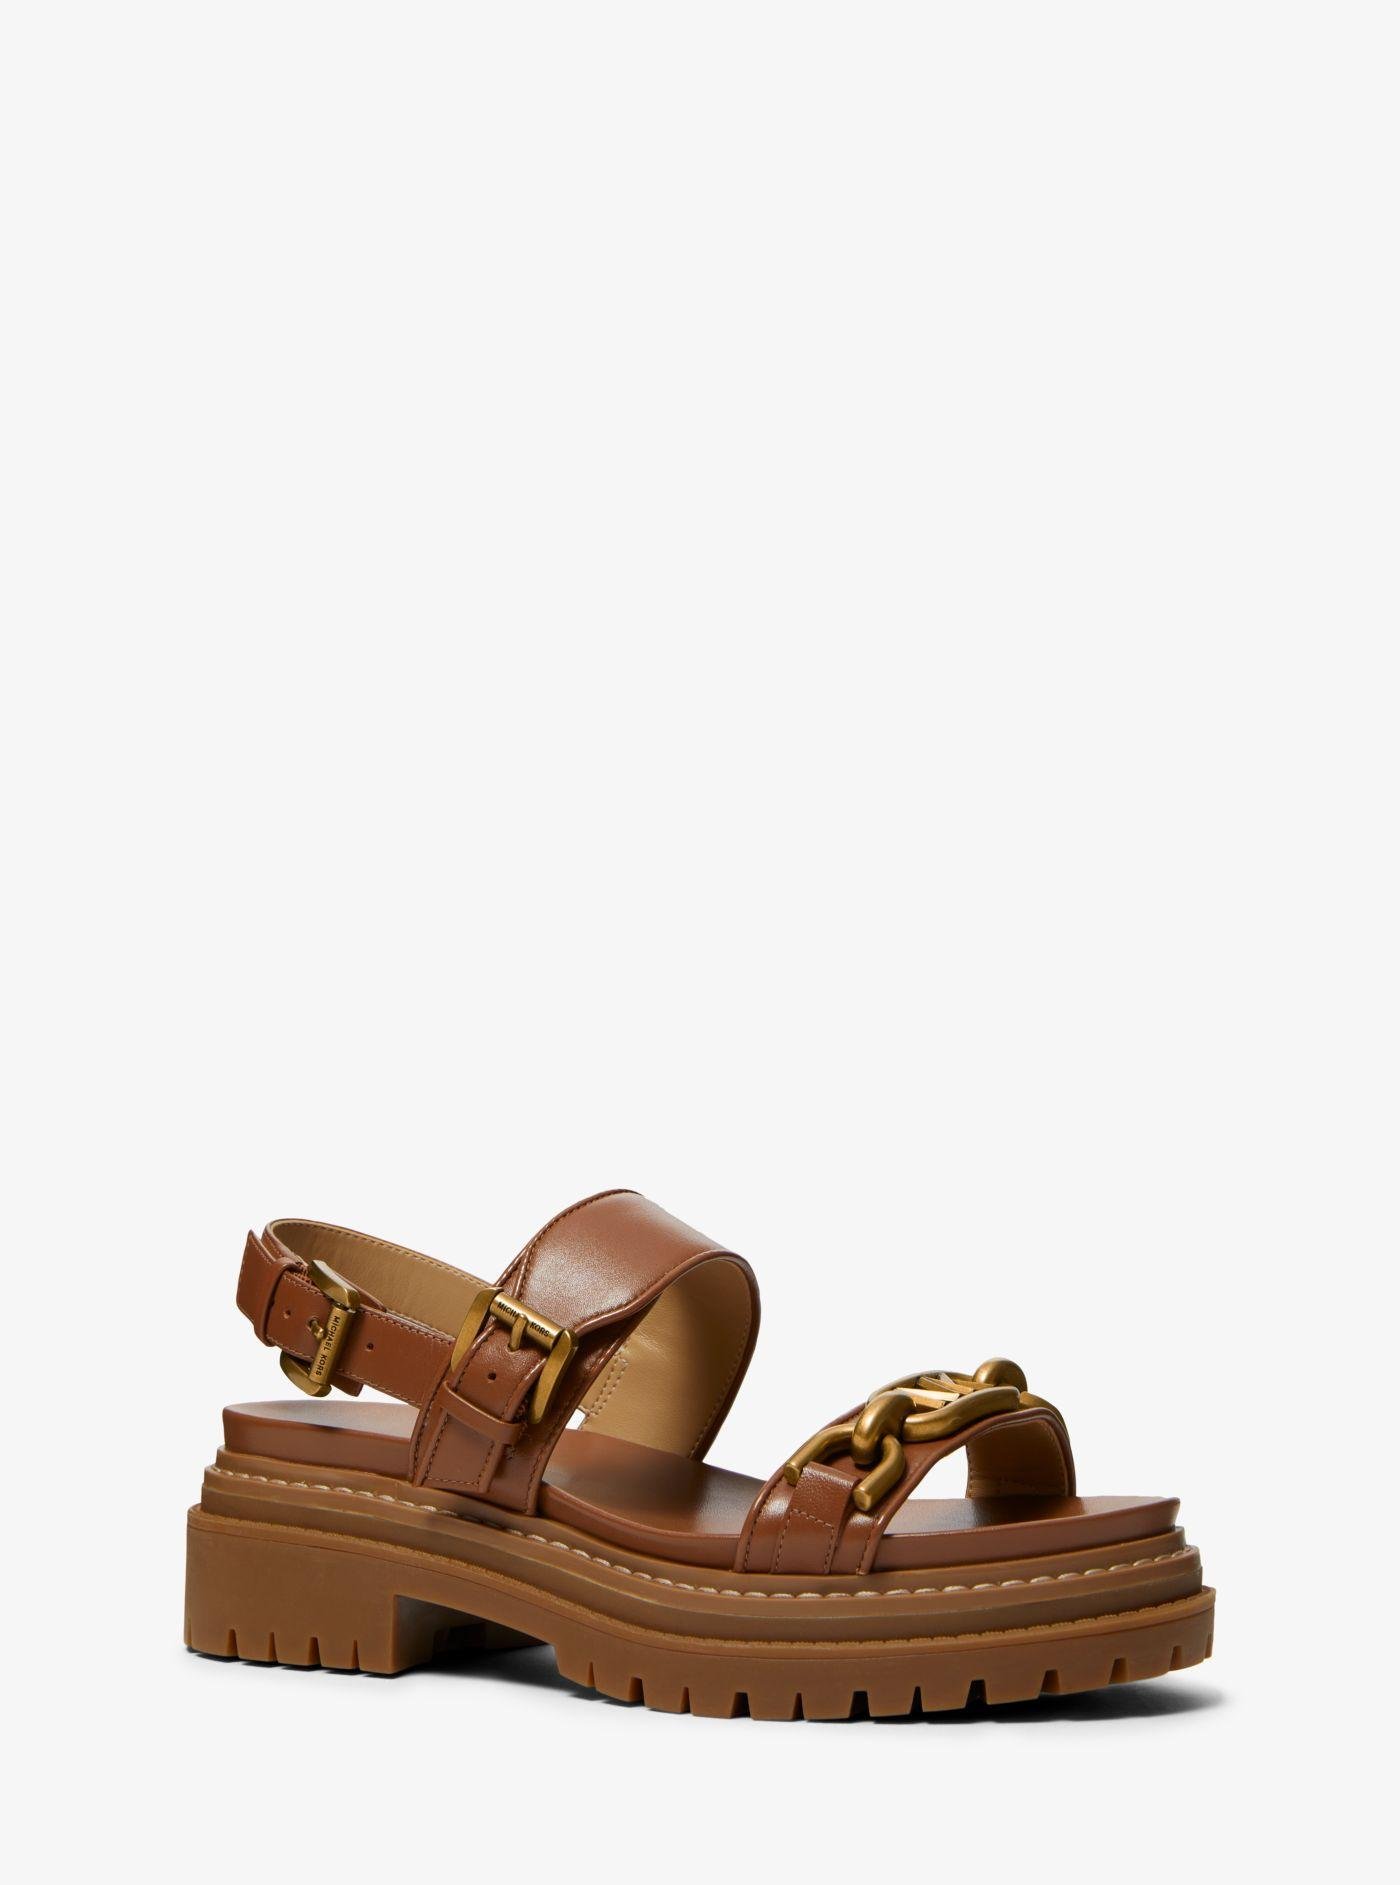 Michael Kors Kailey Logo Embellished Leather Sandal in Brown | Lyst